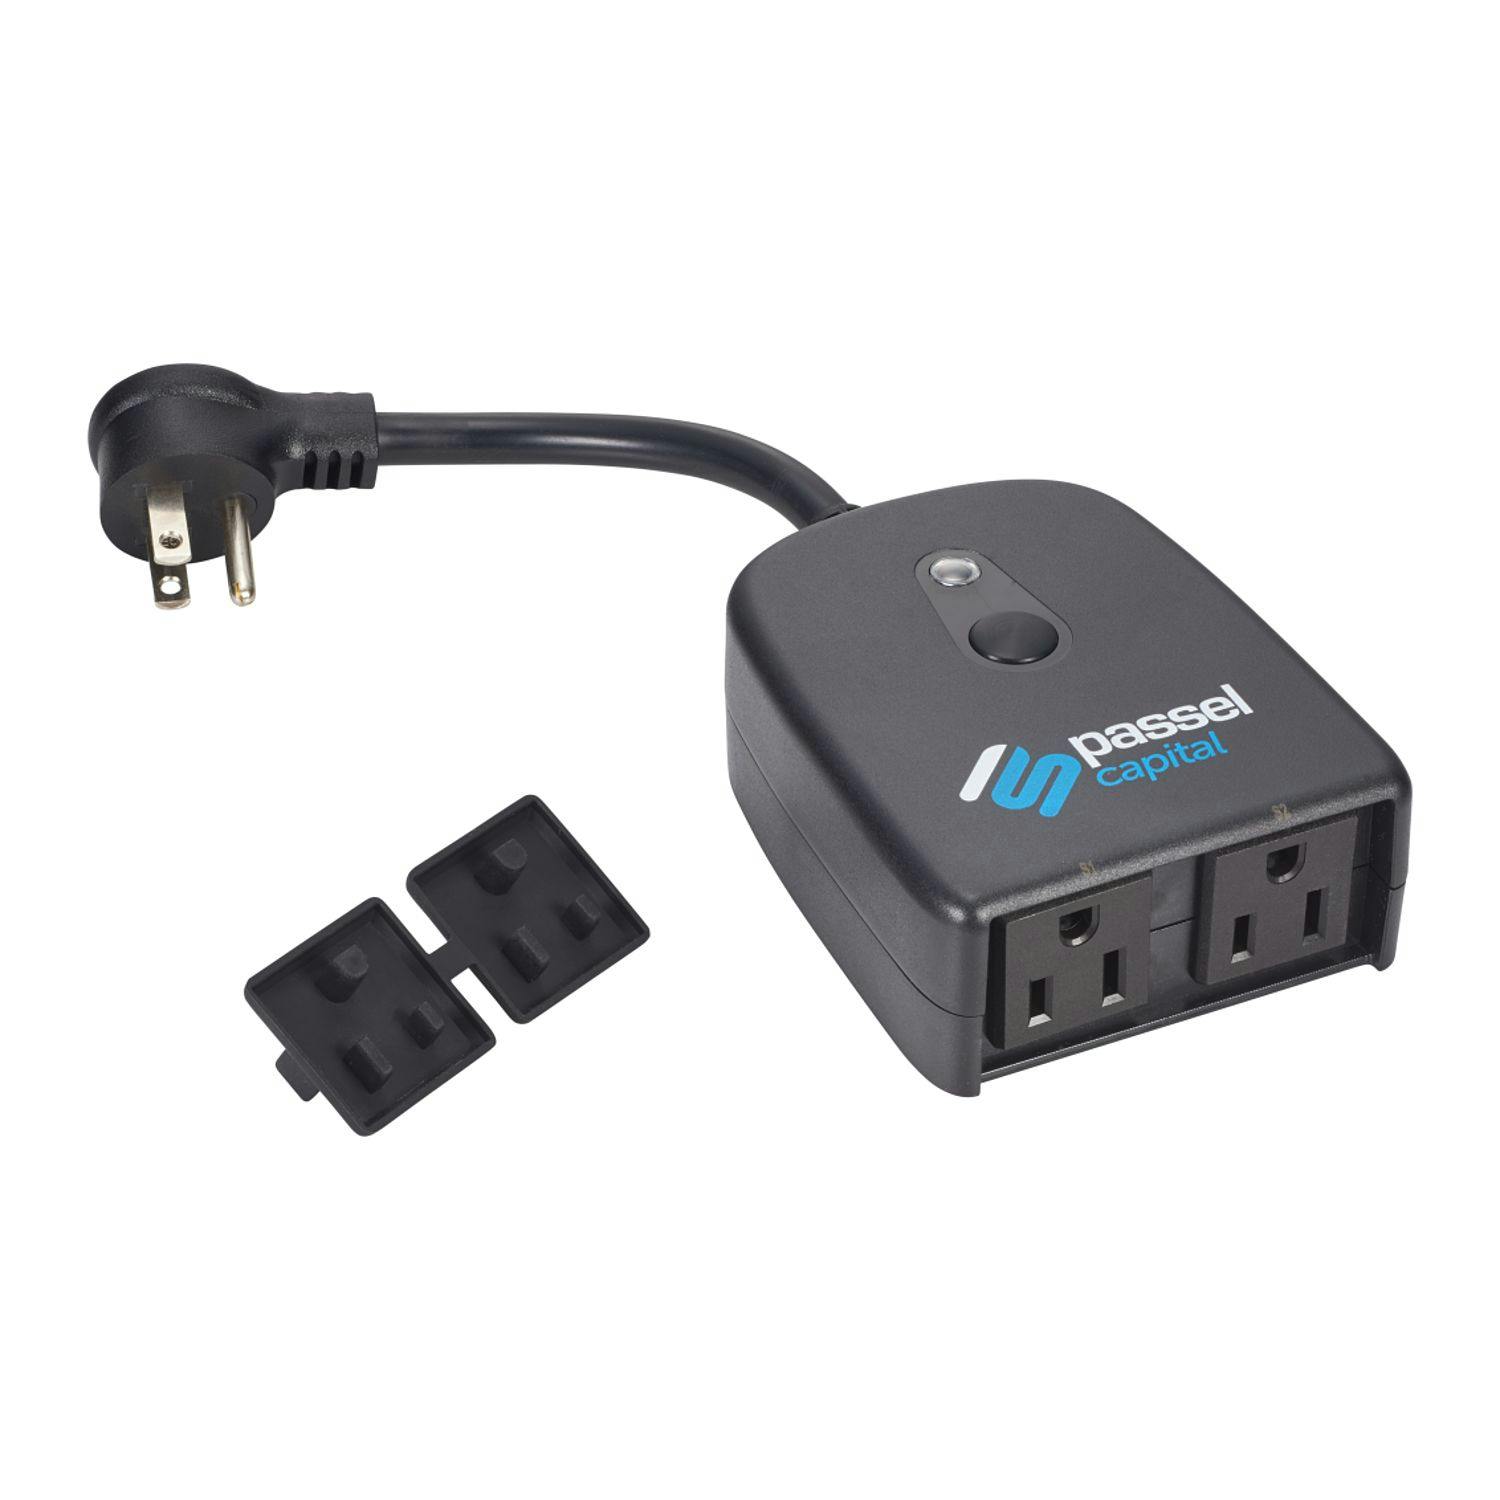 WIFI Smart Outdoor Outlet - additional Image 2